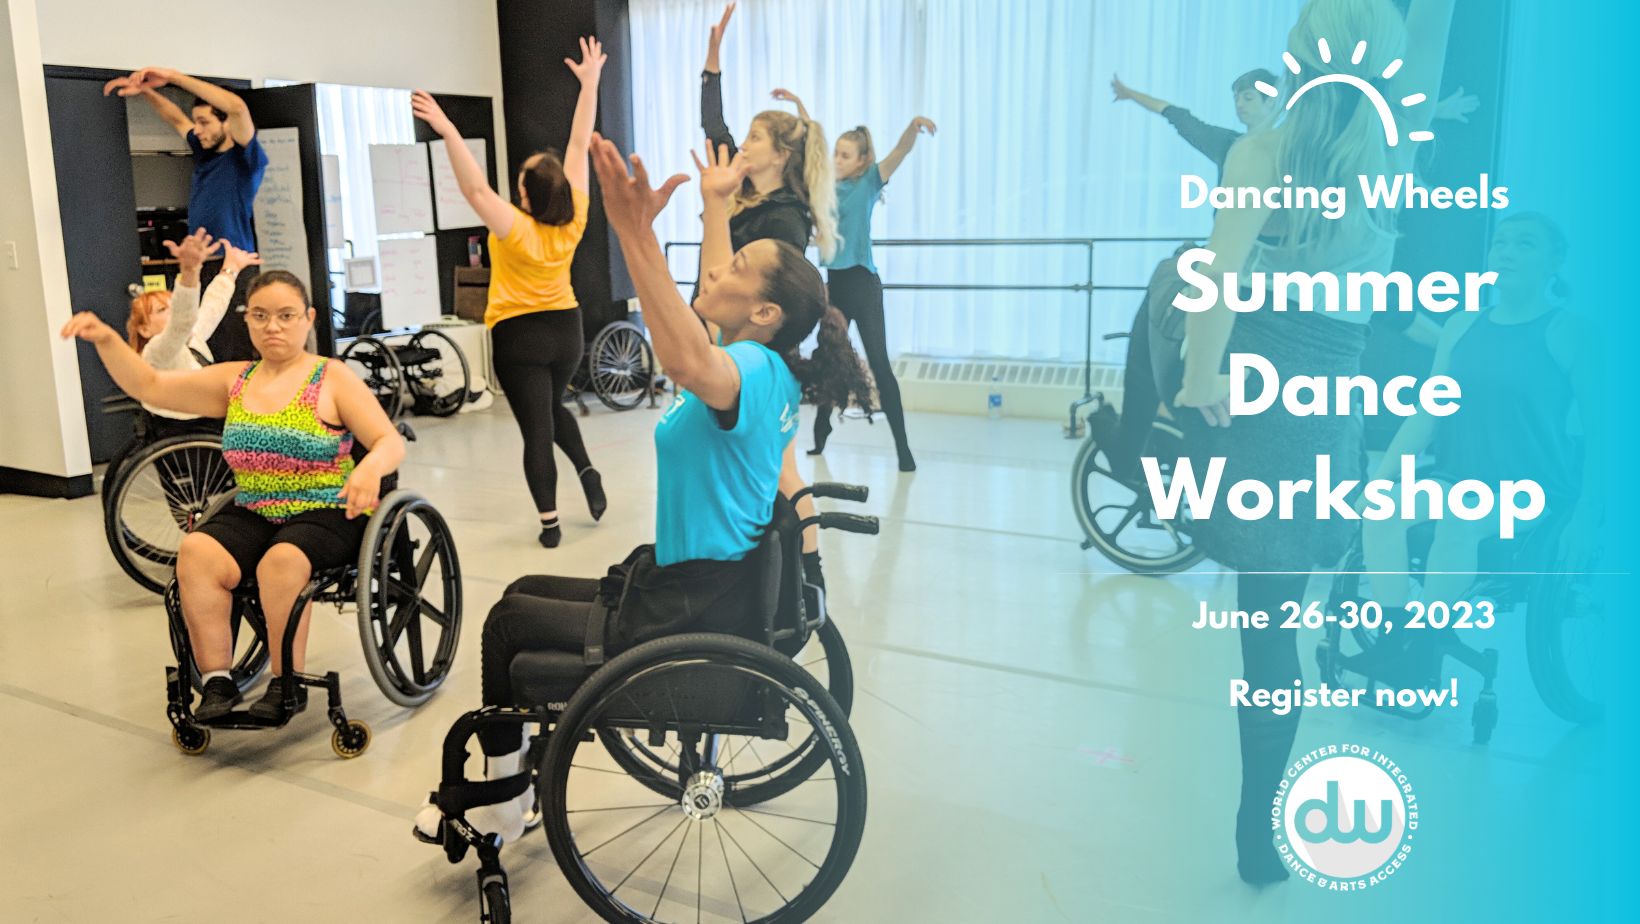 Dancers of all abilities, including wheelchair users, rehearsing in a class. Info about the Summer Dance Workshop on the right.